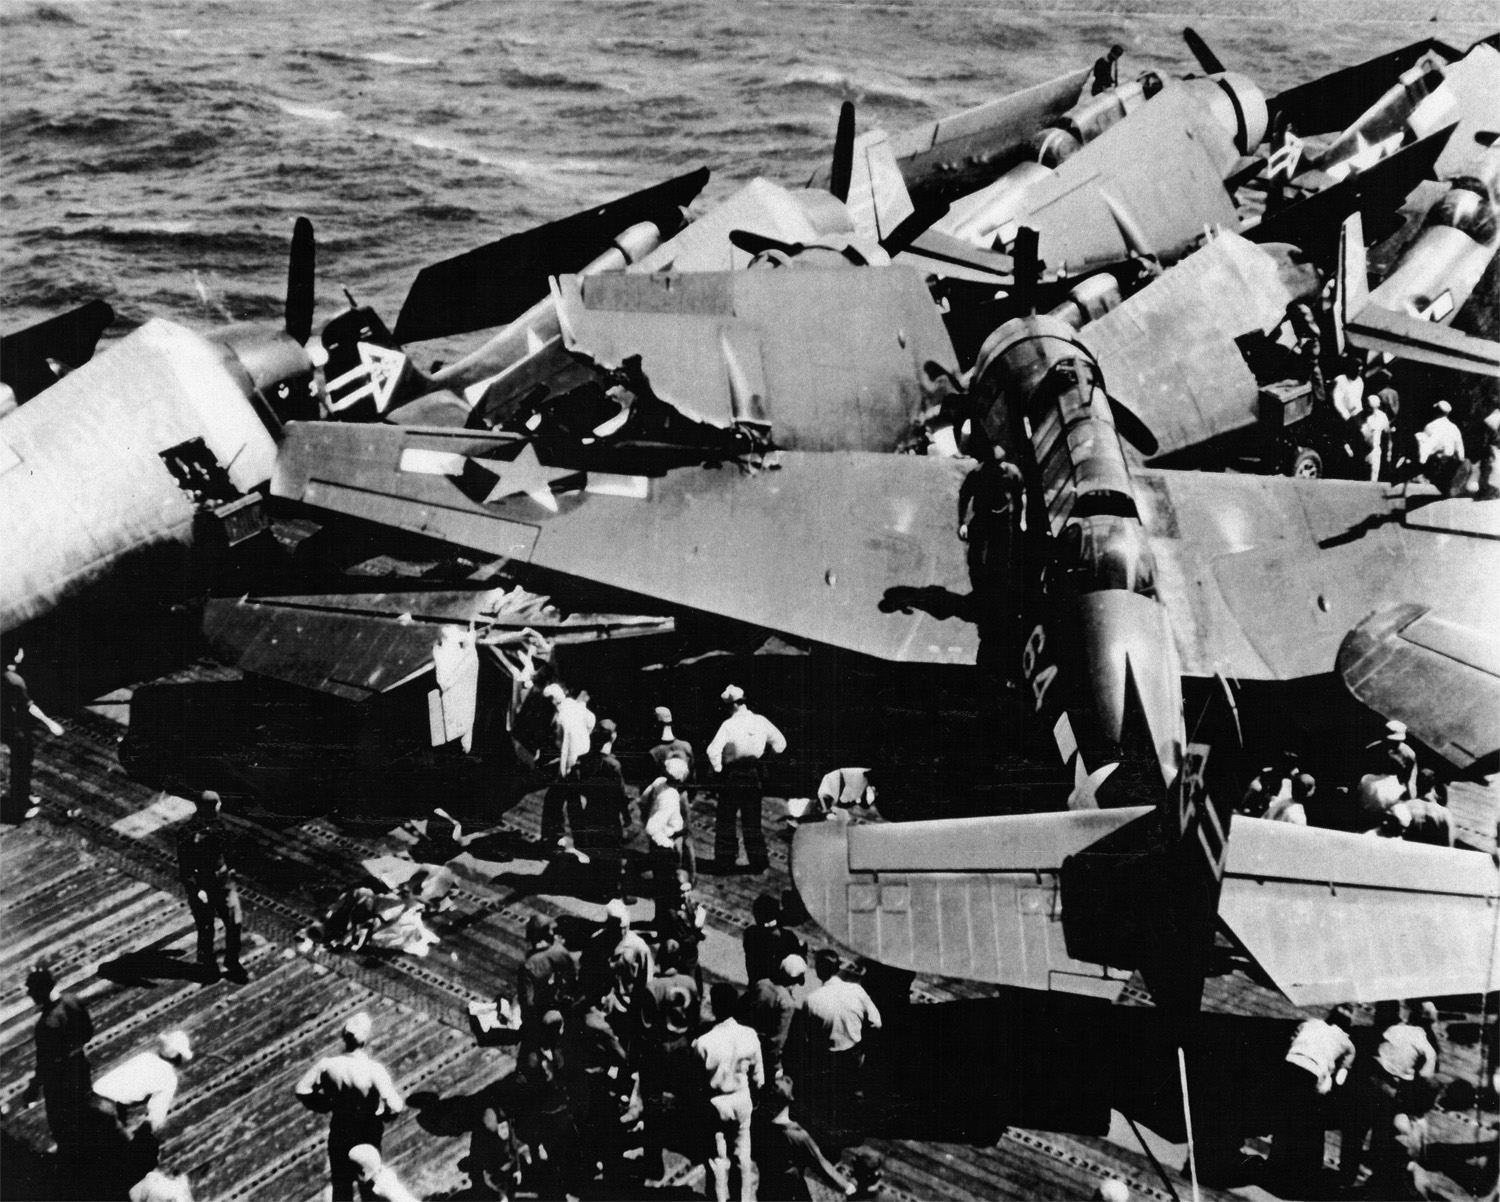 Barr also took this shot after a TBM Avenger missed the arresting wire during landing and crashed into parked planes onboard the Enterprise, April 11, 1945.